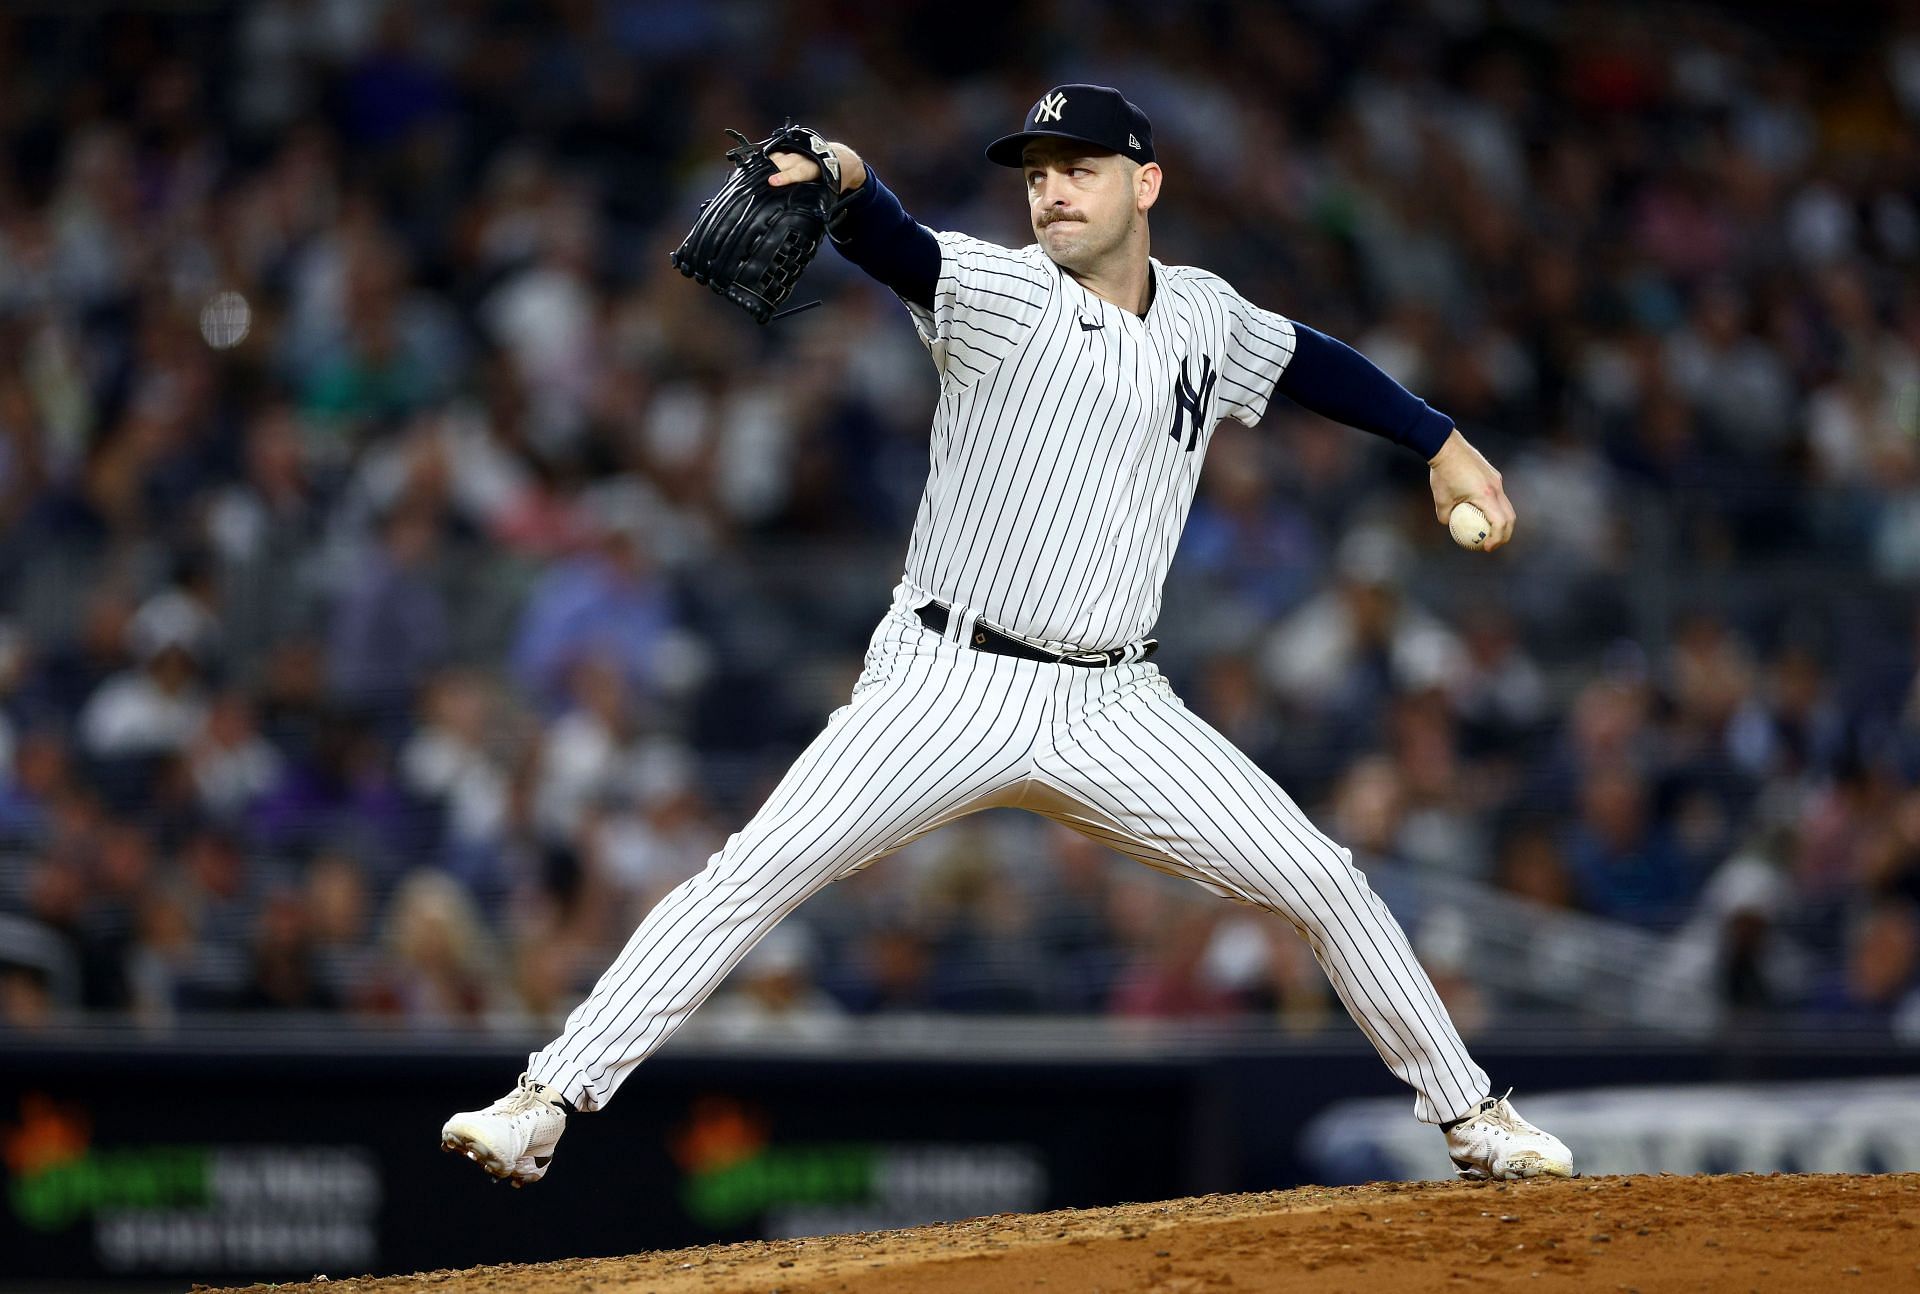 NEW YORK, NEW YORK - SEPTEMBER 21: Lucas of the New York Yankees delivers a pitch in the sixth inning against the Pittsburgh Pirates at Yankee Stadium on September 21, 2022, in the Bronx borough of New York City. (Photo by Elsa/Getty Images)